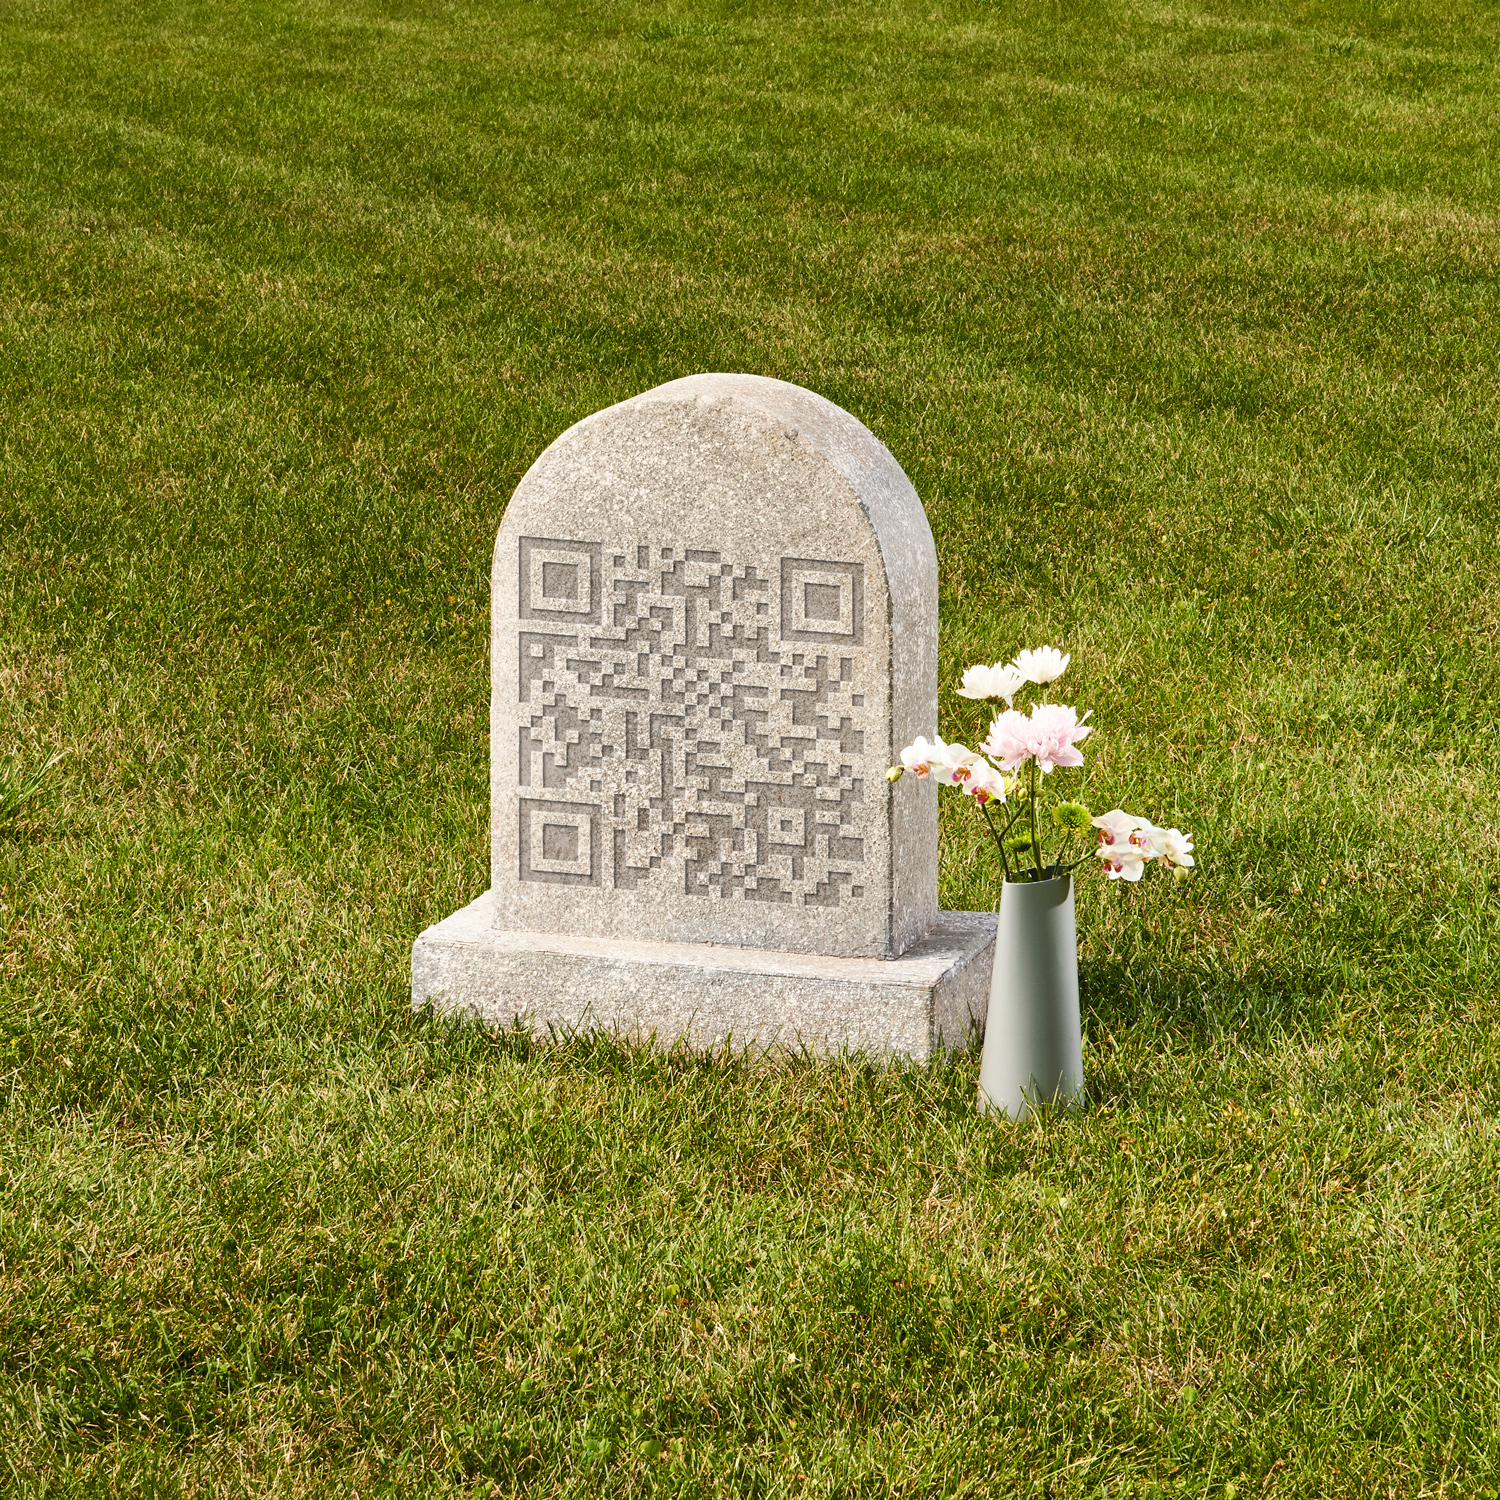 A photo of a tombstone in a grassy patch of lawn representing funeral start-ups